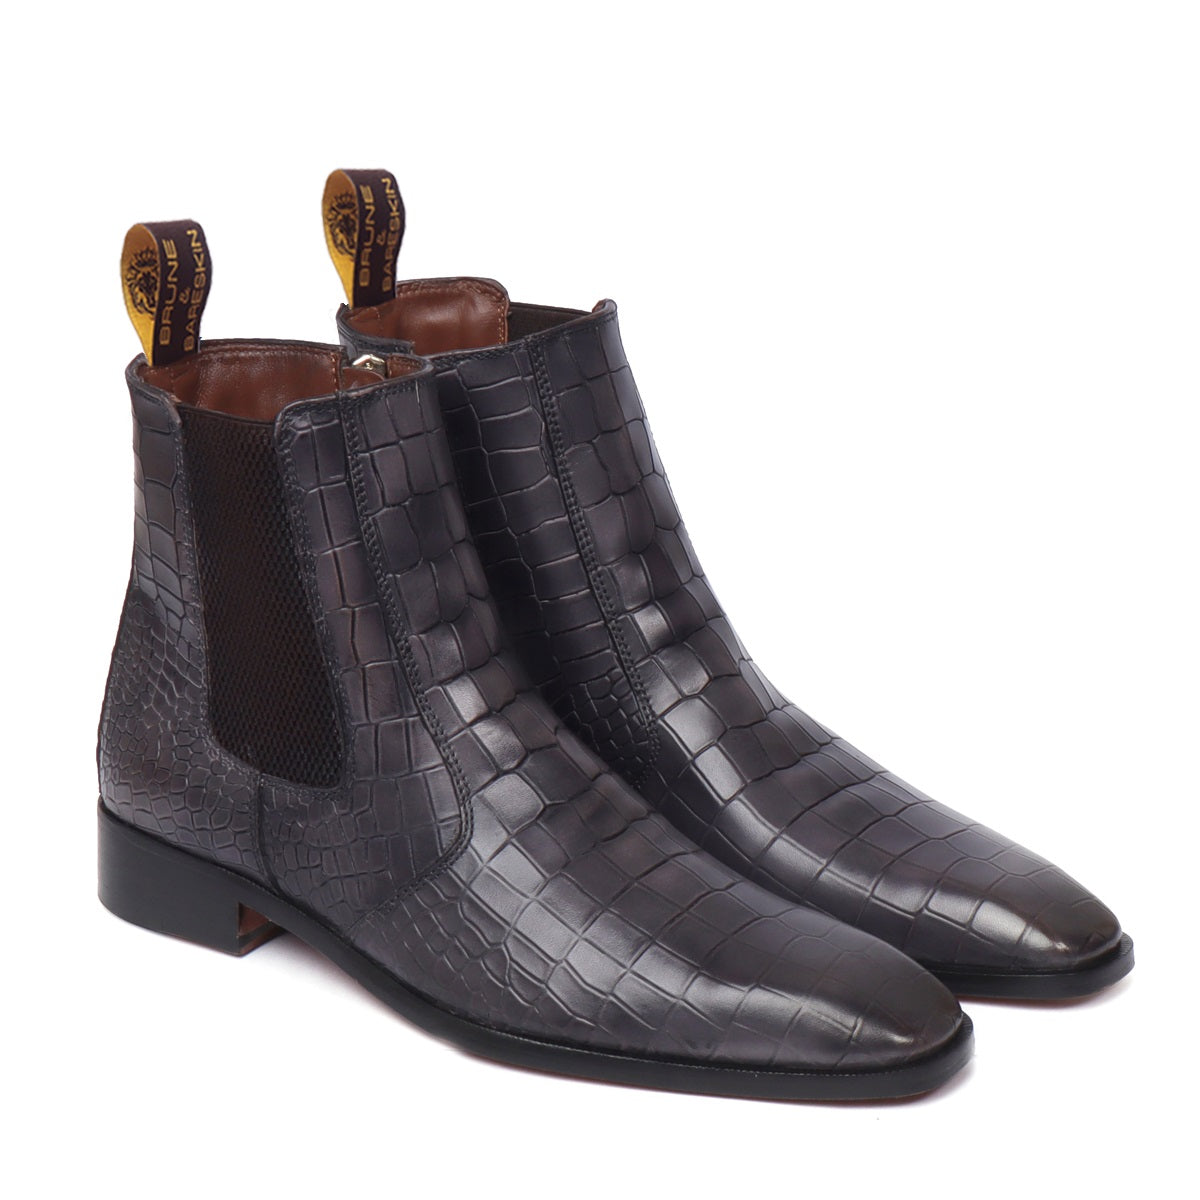 Grey Deep Cut Croco Textured Leather Chelsea Boots with Zip Closure by Brune & Bareskin